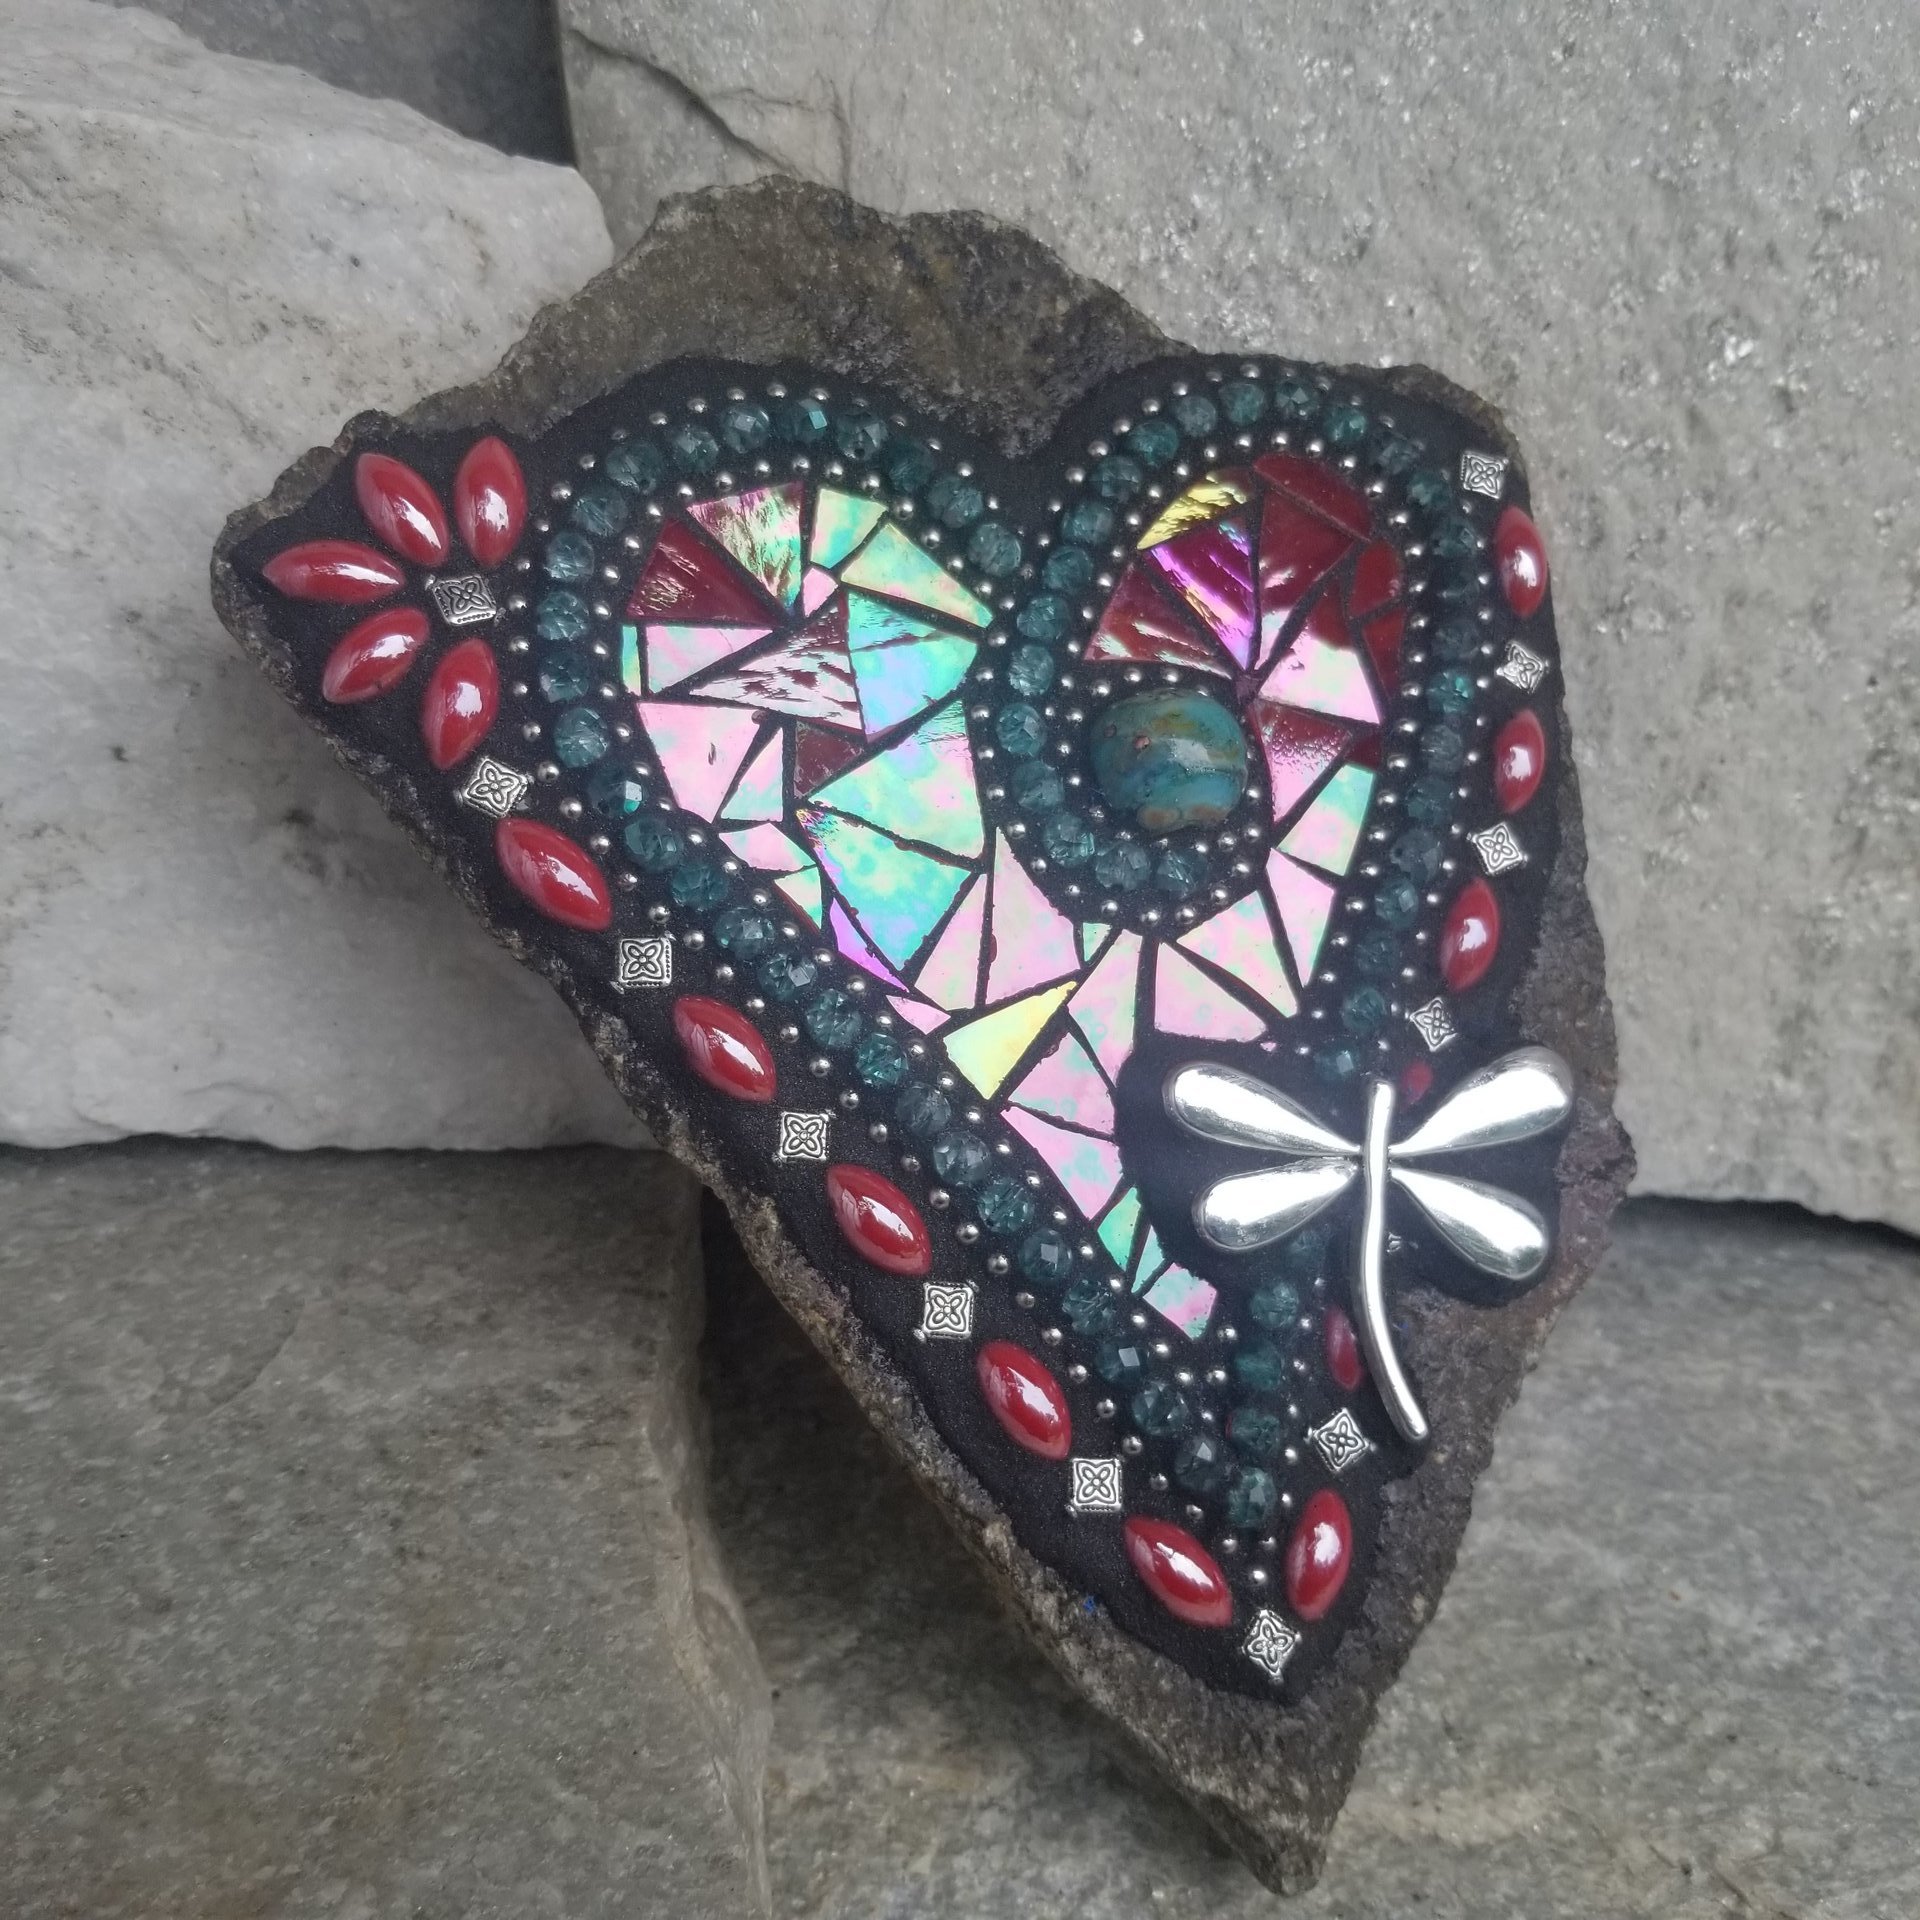 Iridescent Red Mosaic Heart Garden Stone with Dragonfly  